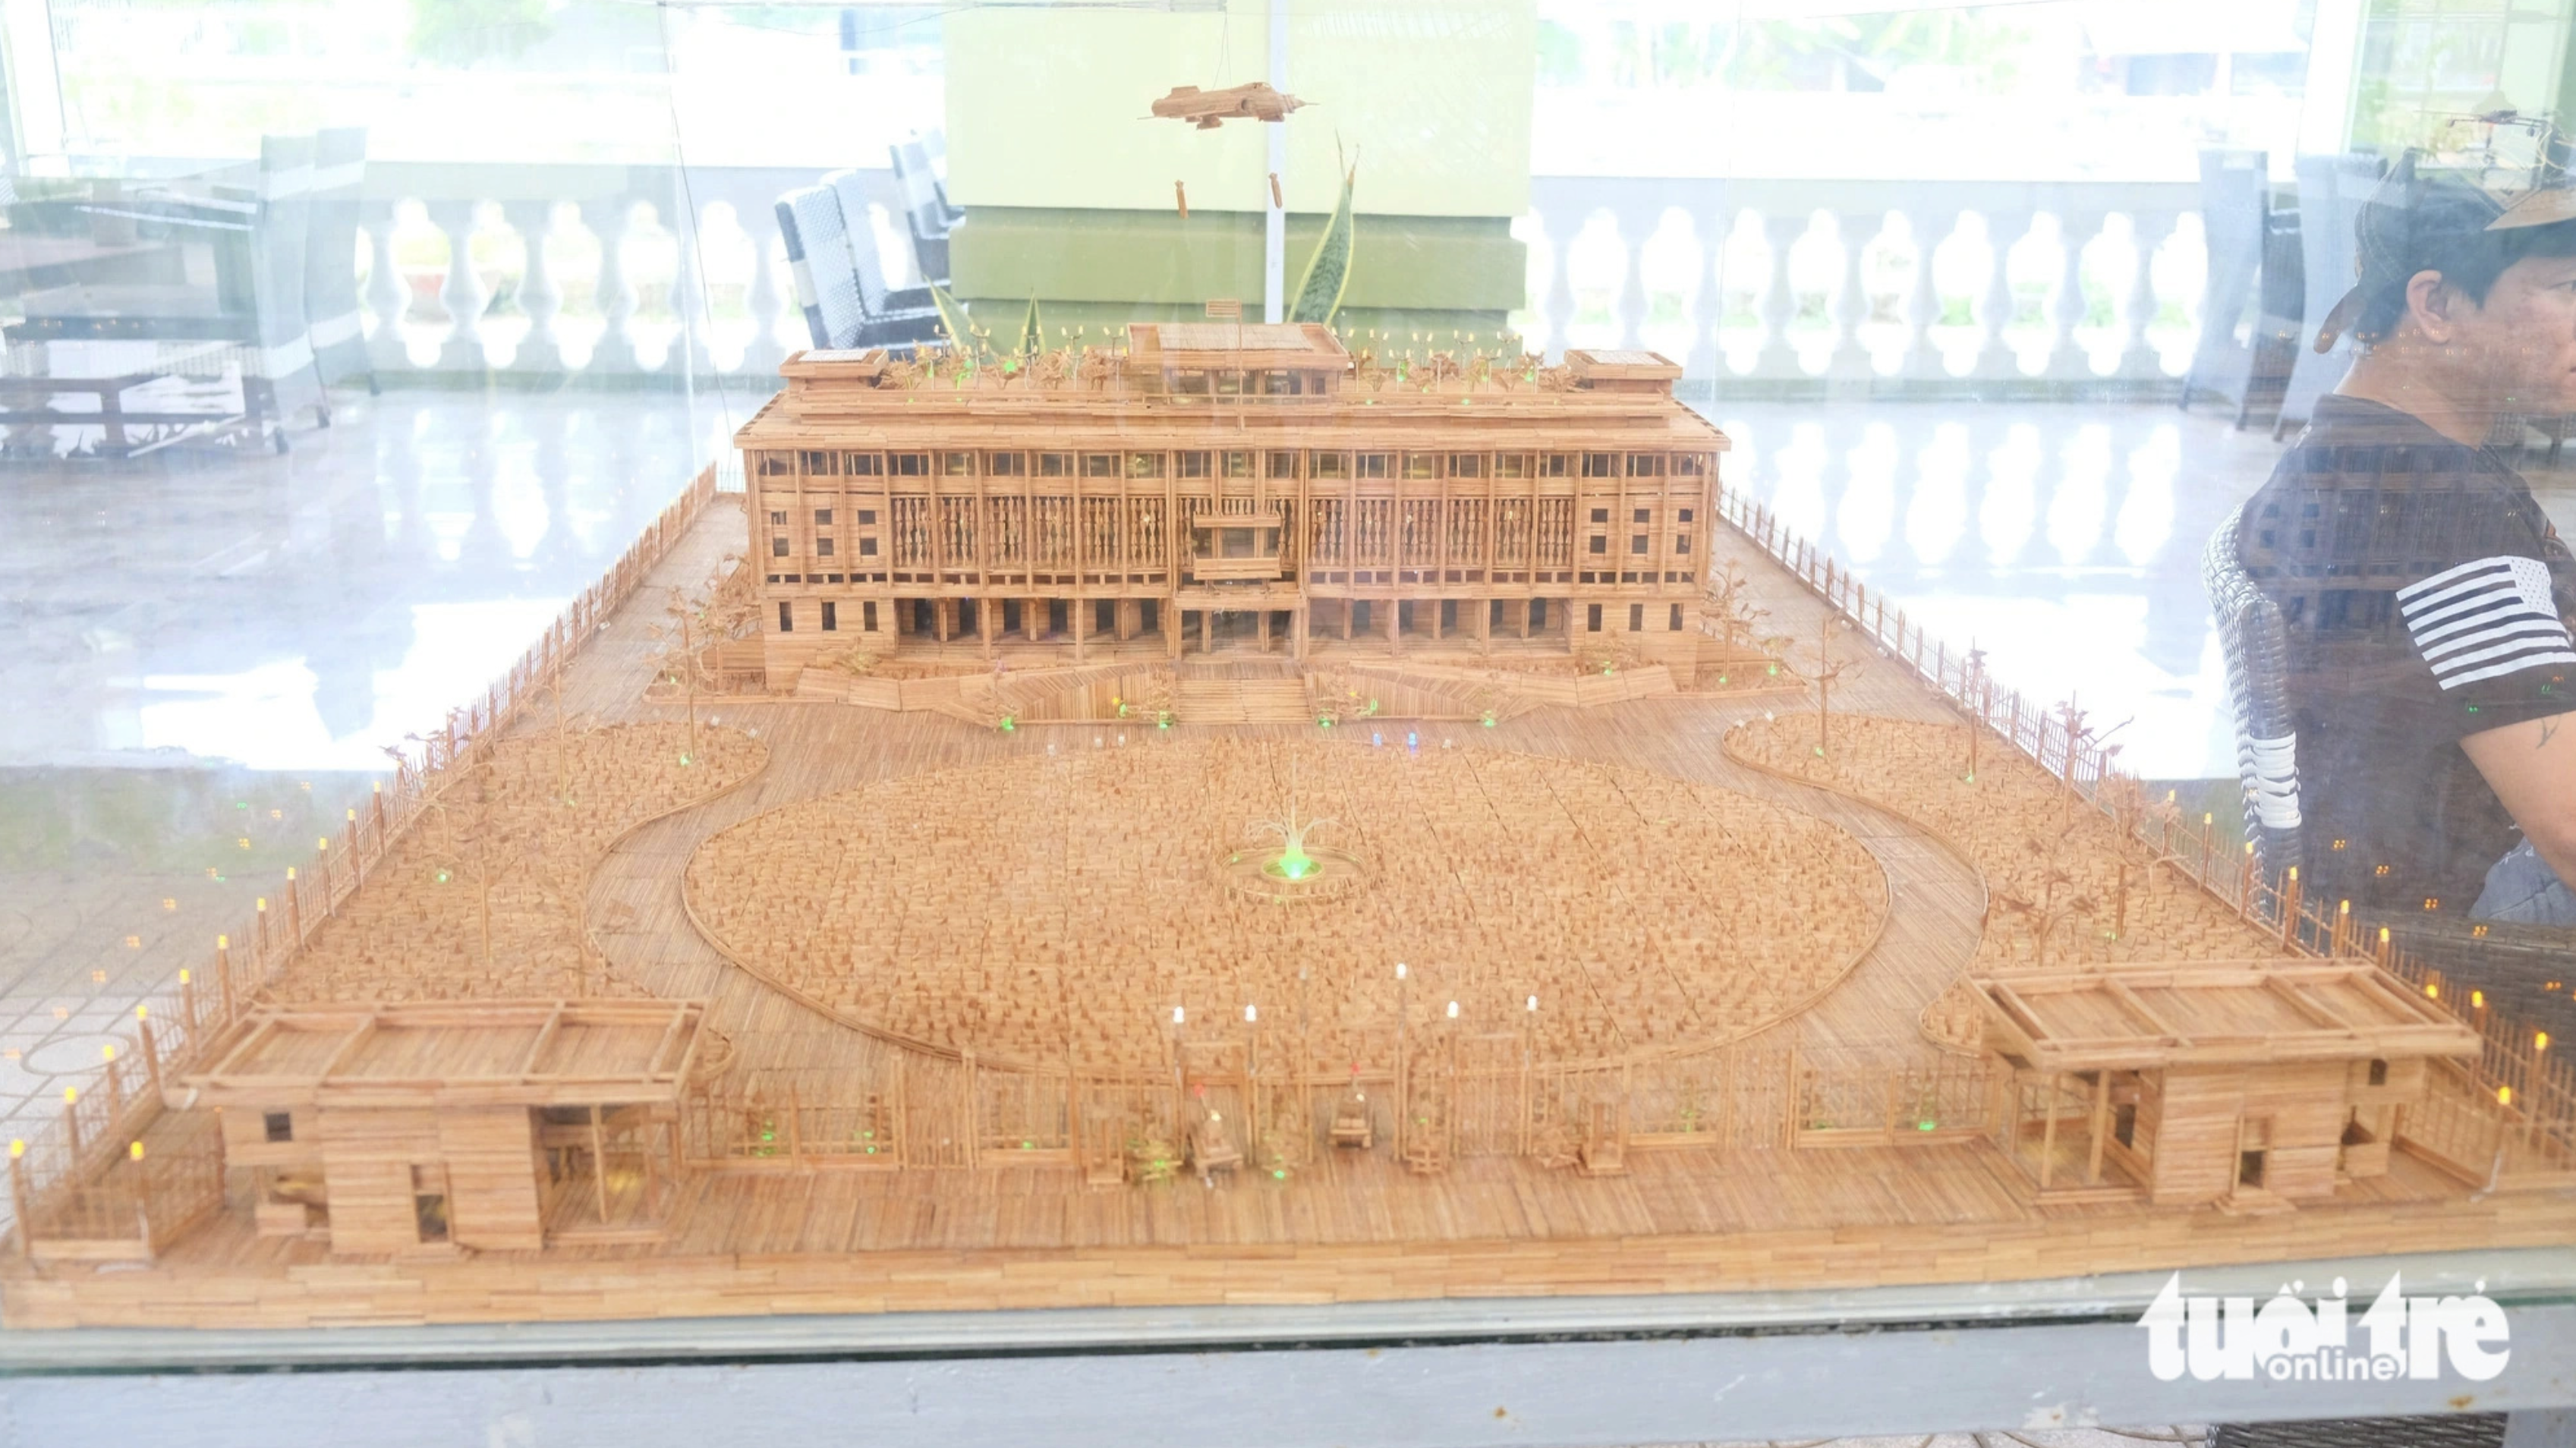 An overview of a toothpick model of the Reunification Palace. Photo: Dang Tuyet / Tuoi Tre